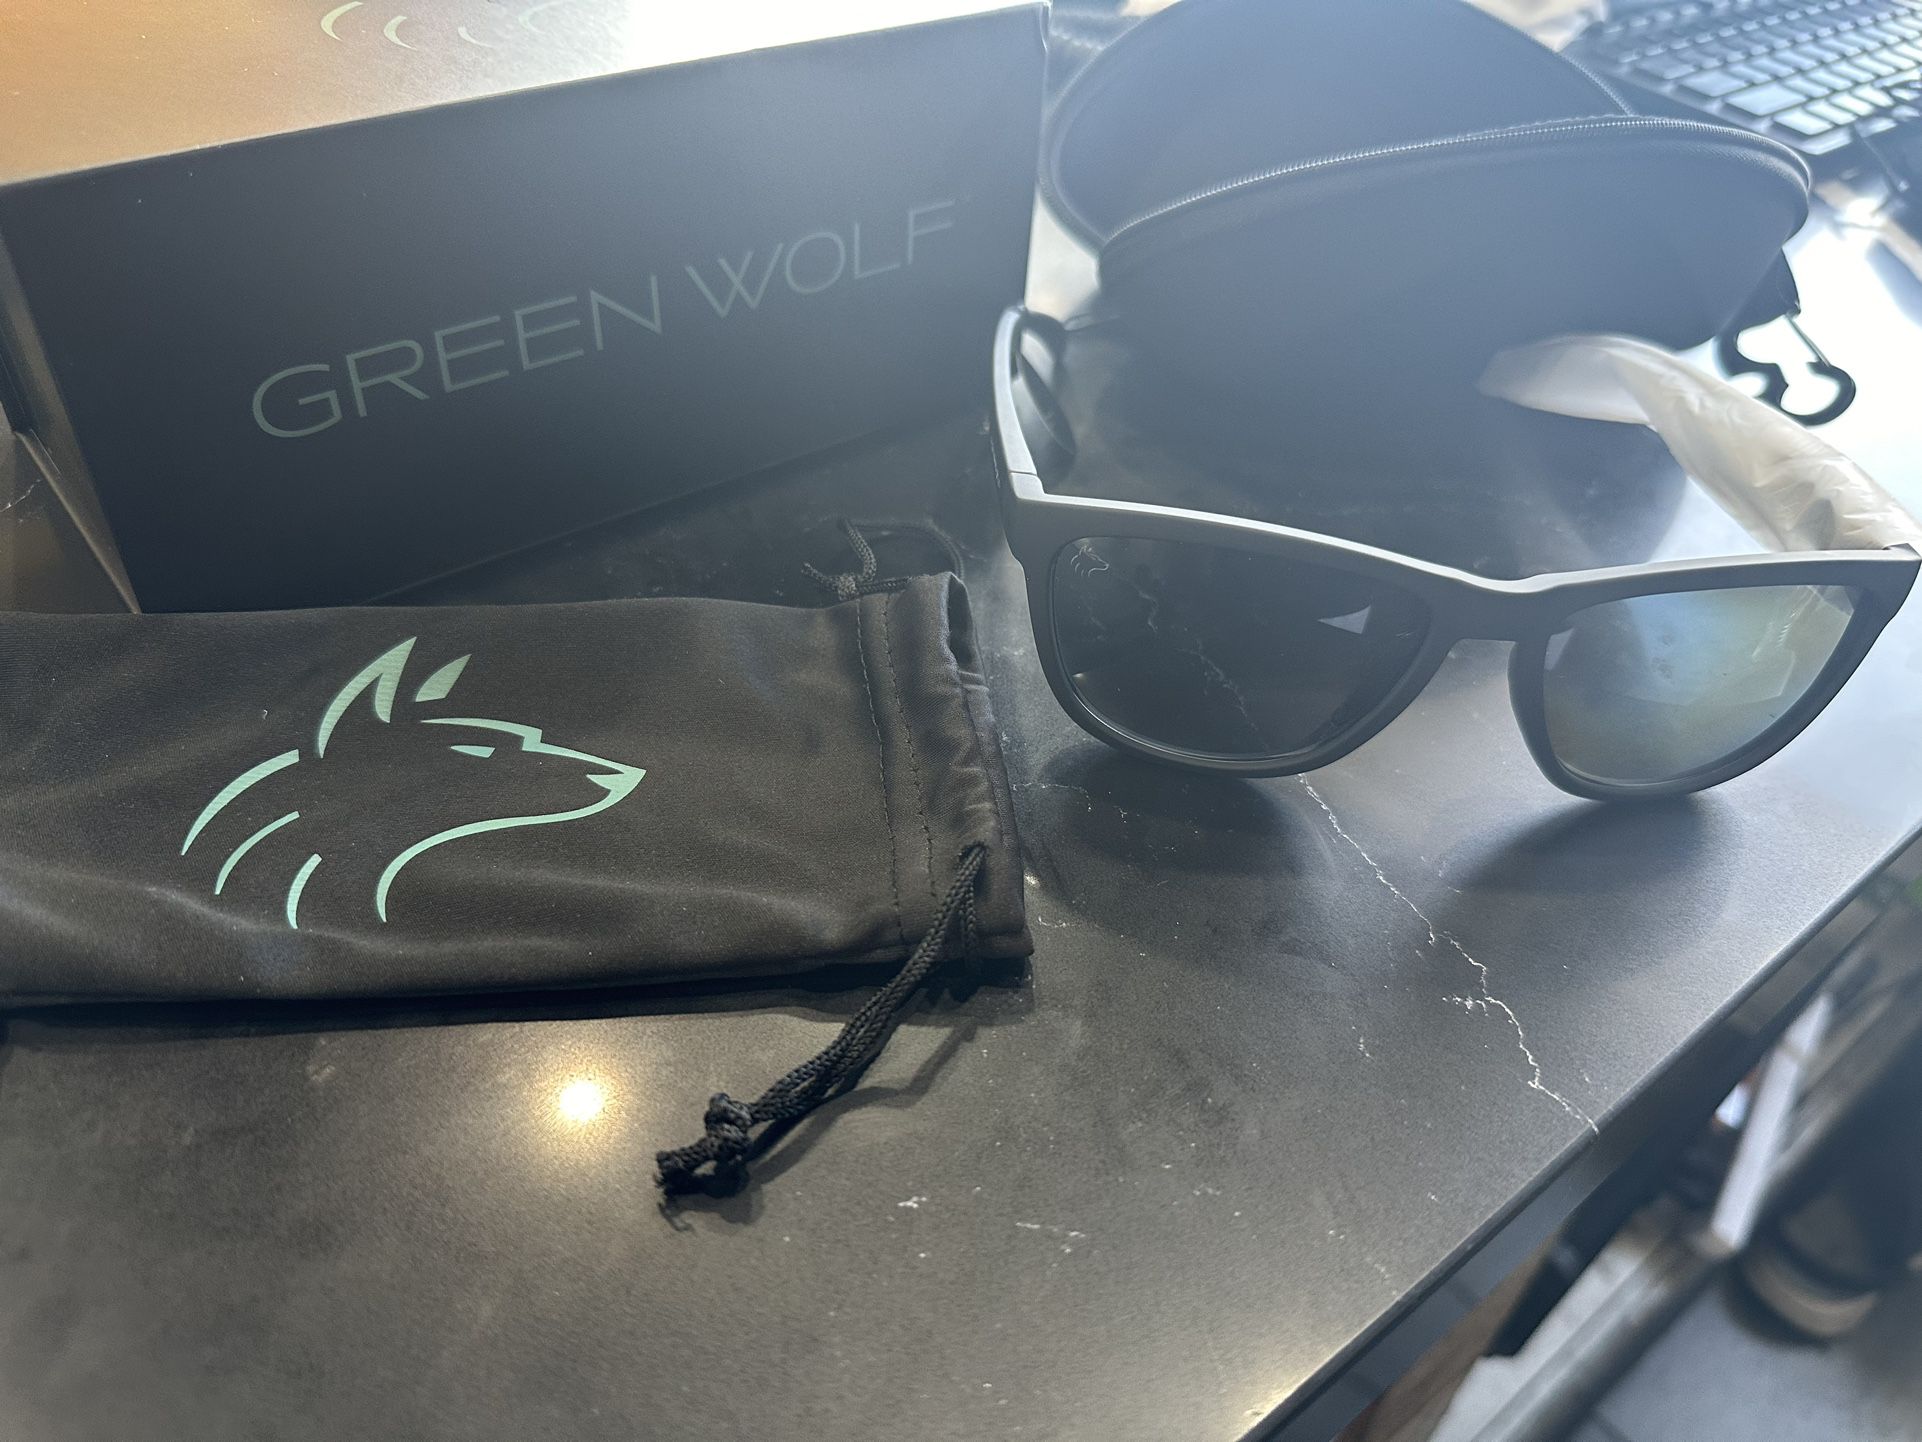 Green Wolf Gaming Glasses 